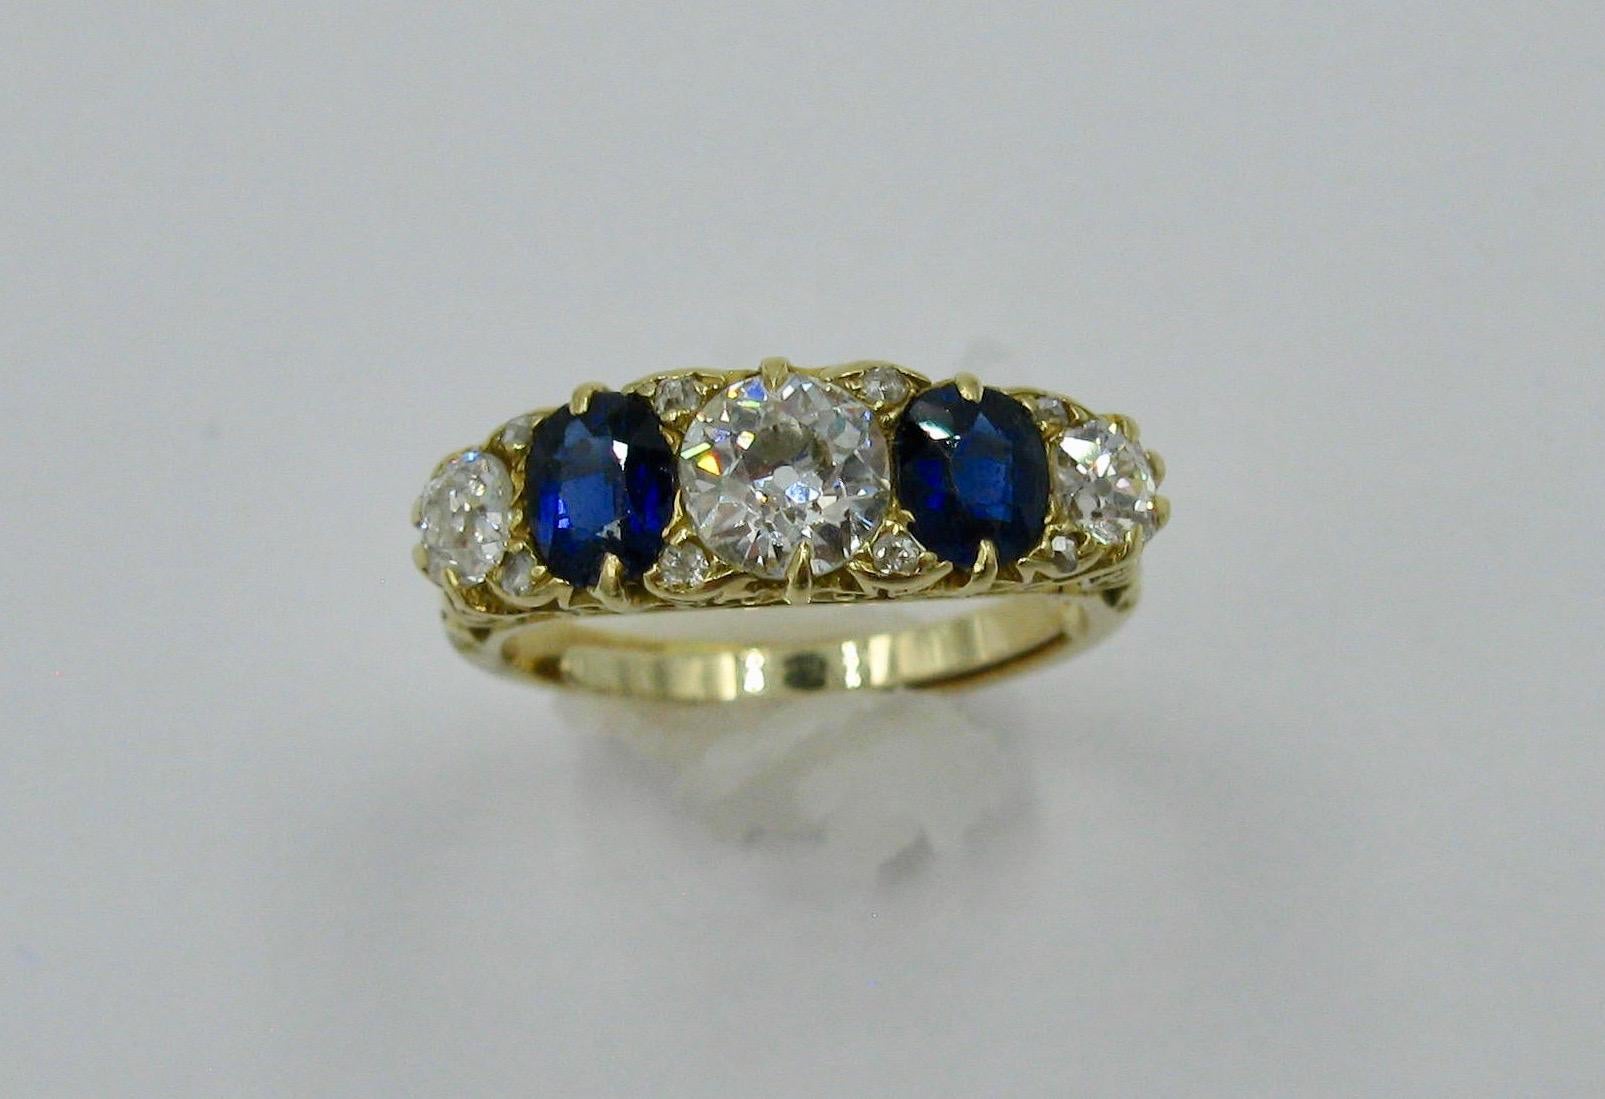 This is a stunning antique Victorian Wedding Engagement Ring with 1.08 Carat of Old European Cut Diamonds of superb white color and fire!  And 2 natural mined Blue Sapphires of incredible color and totaling .82 Carat.  The setting is a beautiful 18K